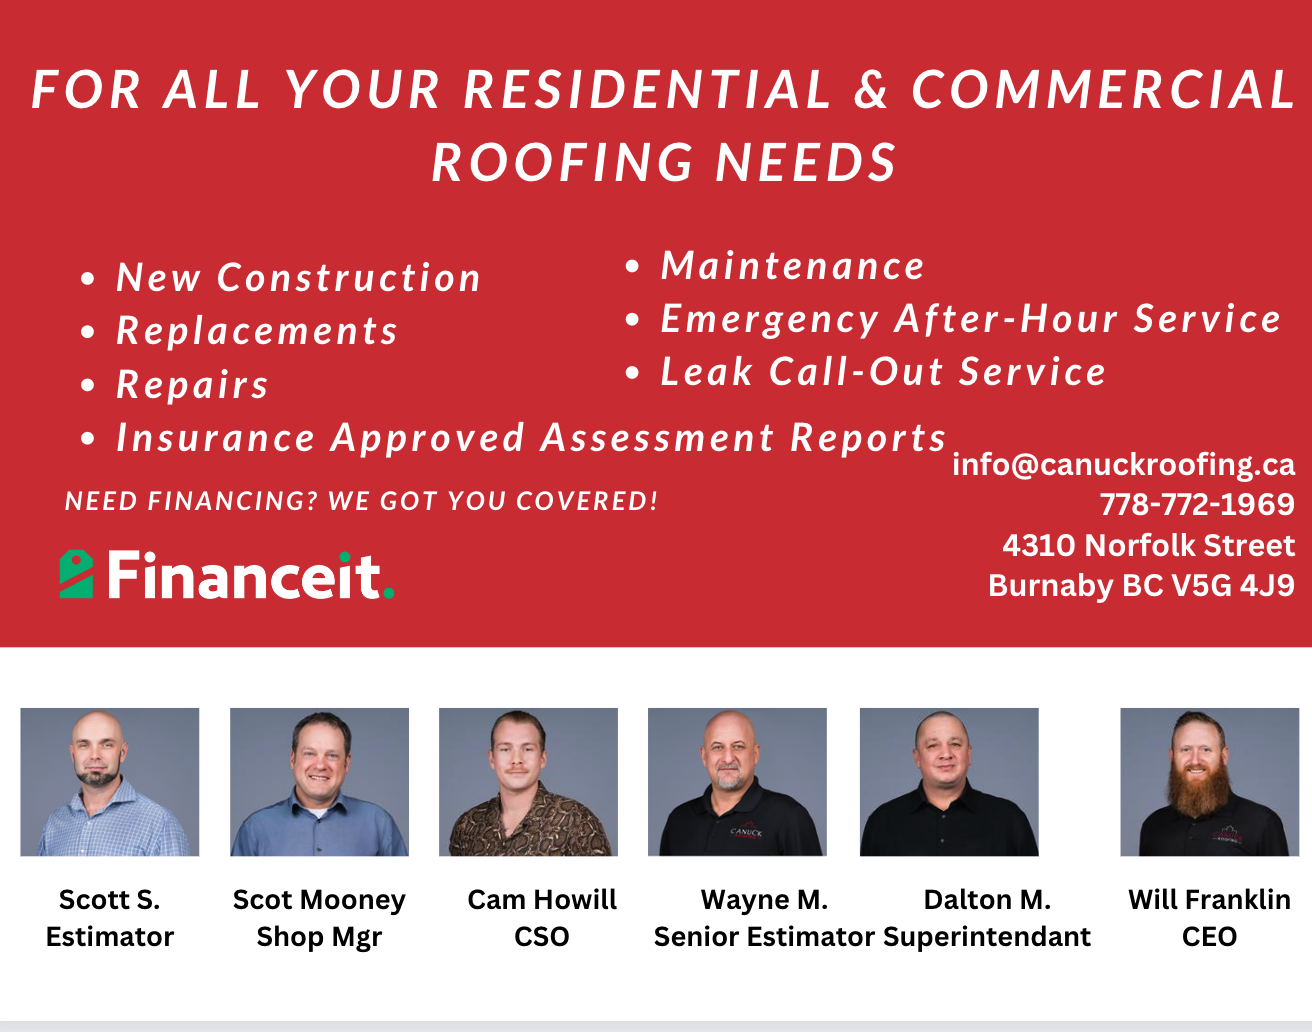 Canuck Team are proud to offer quality roofing services to strata properties 